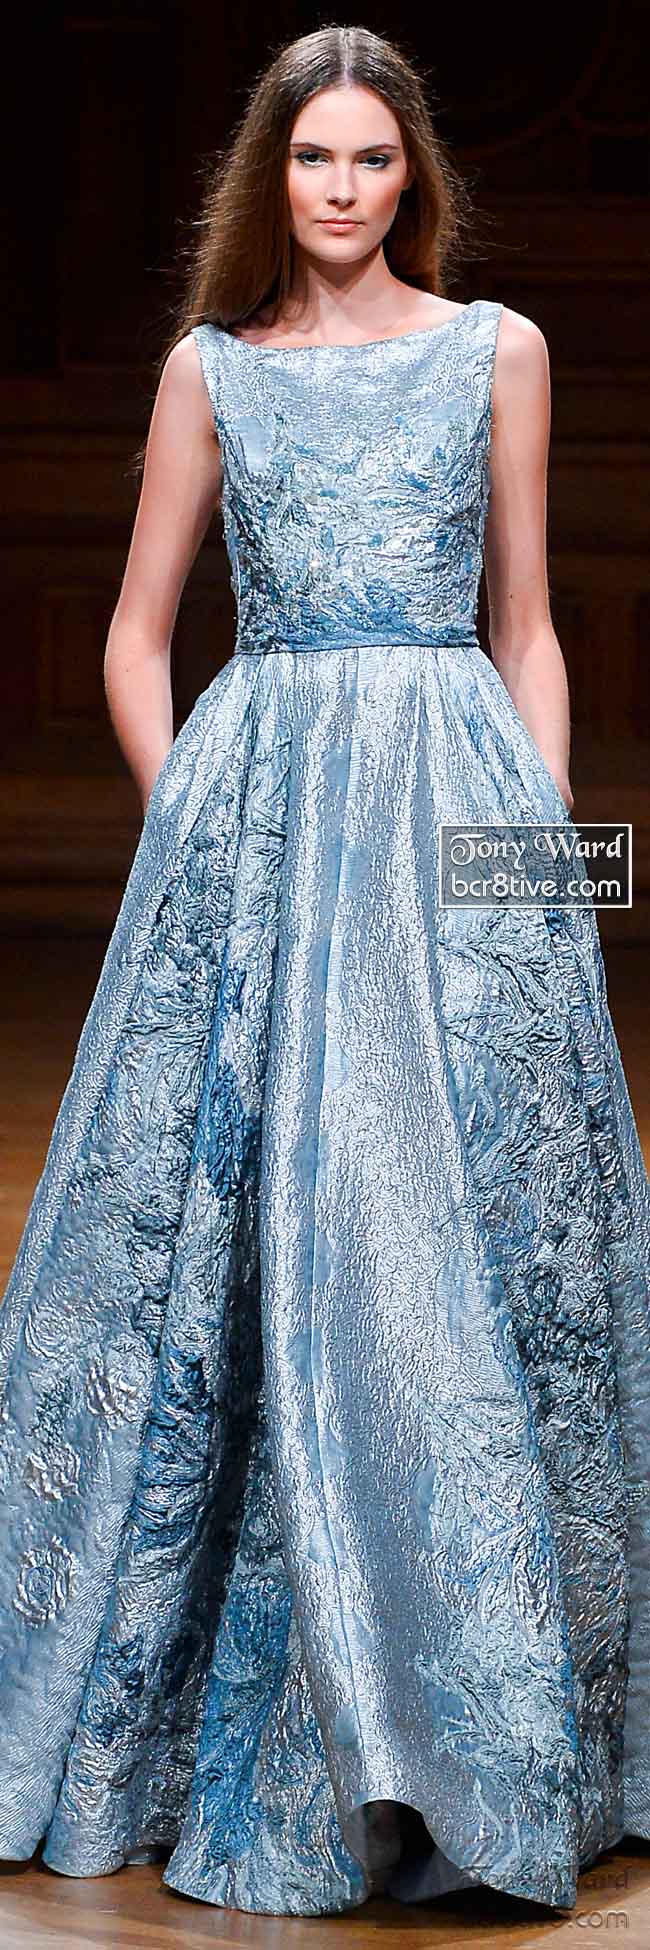 Tony Ward Fall Winter 2014-15 Couture – Page 4 – Be Creative